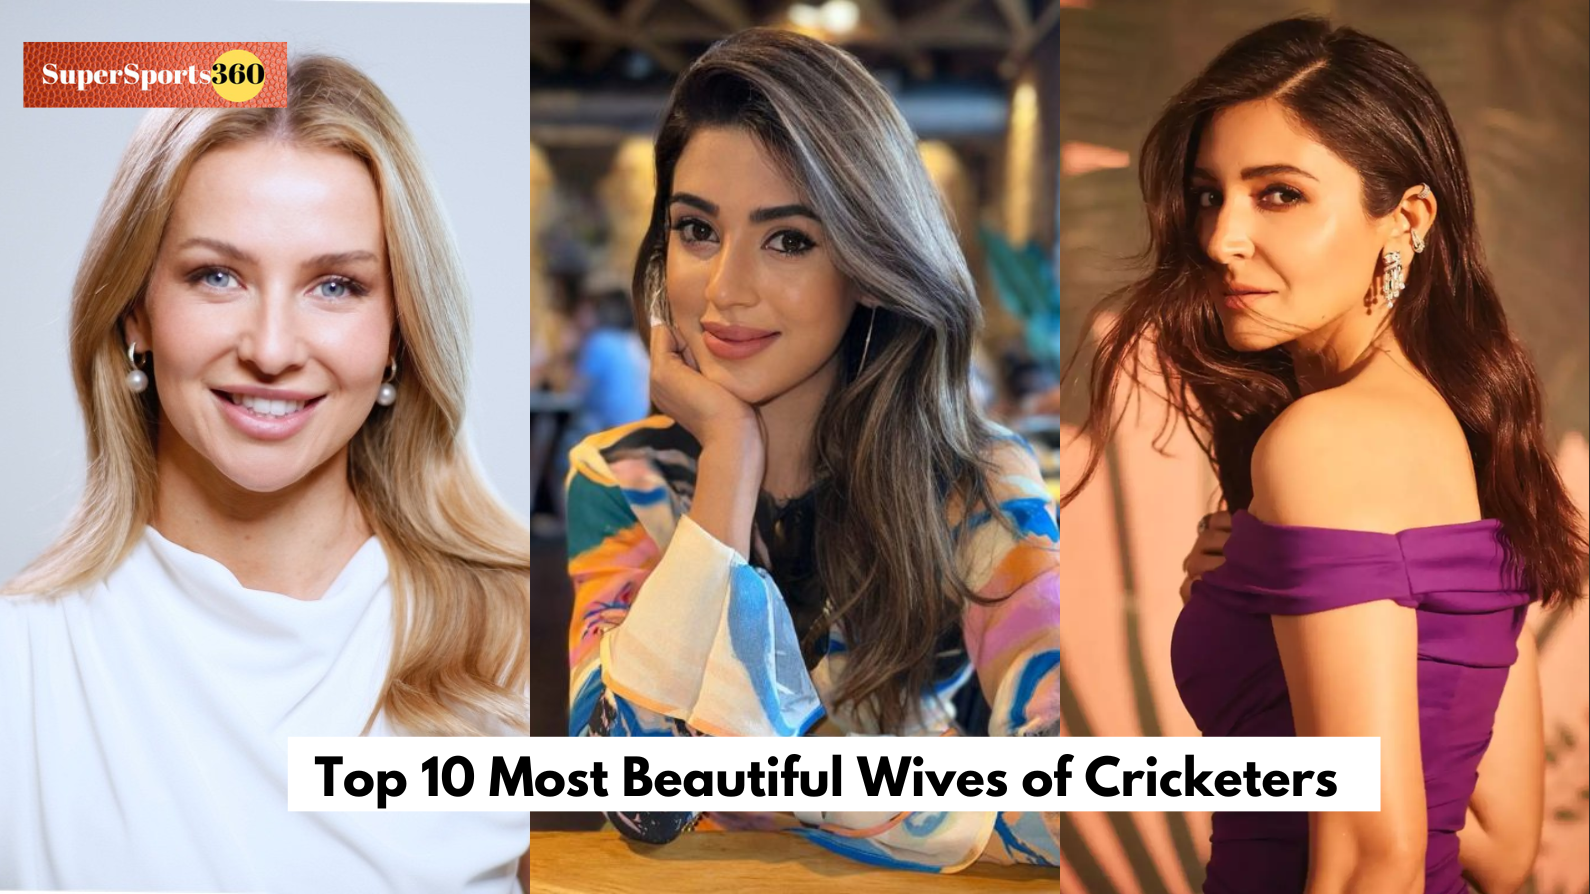 Top 10 Most Beautiful Wives of Cricketers